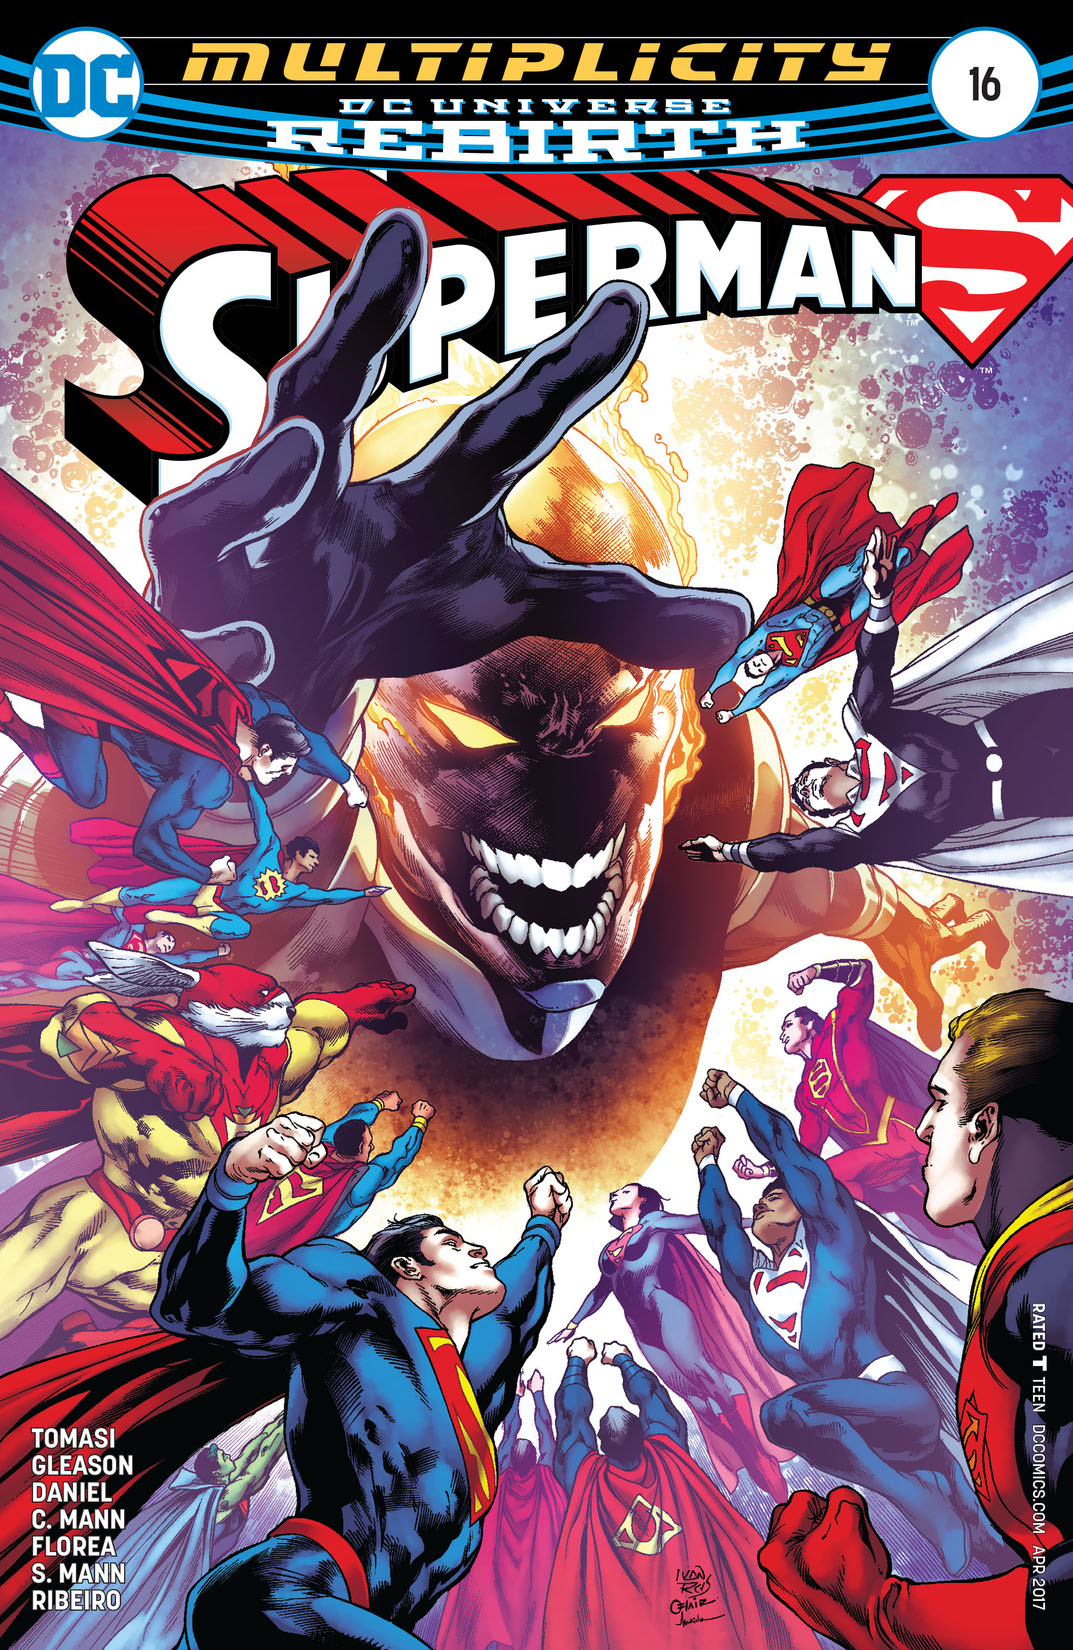 Superman (2016-) #16 preview images